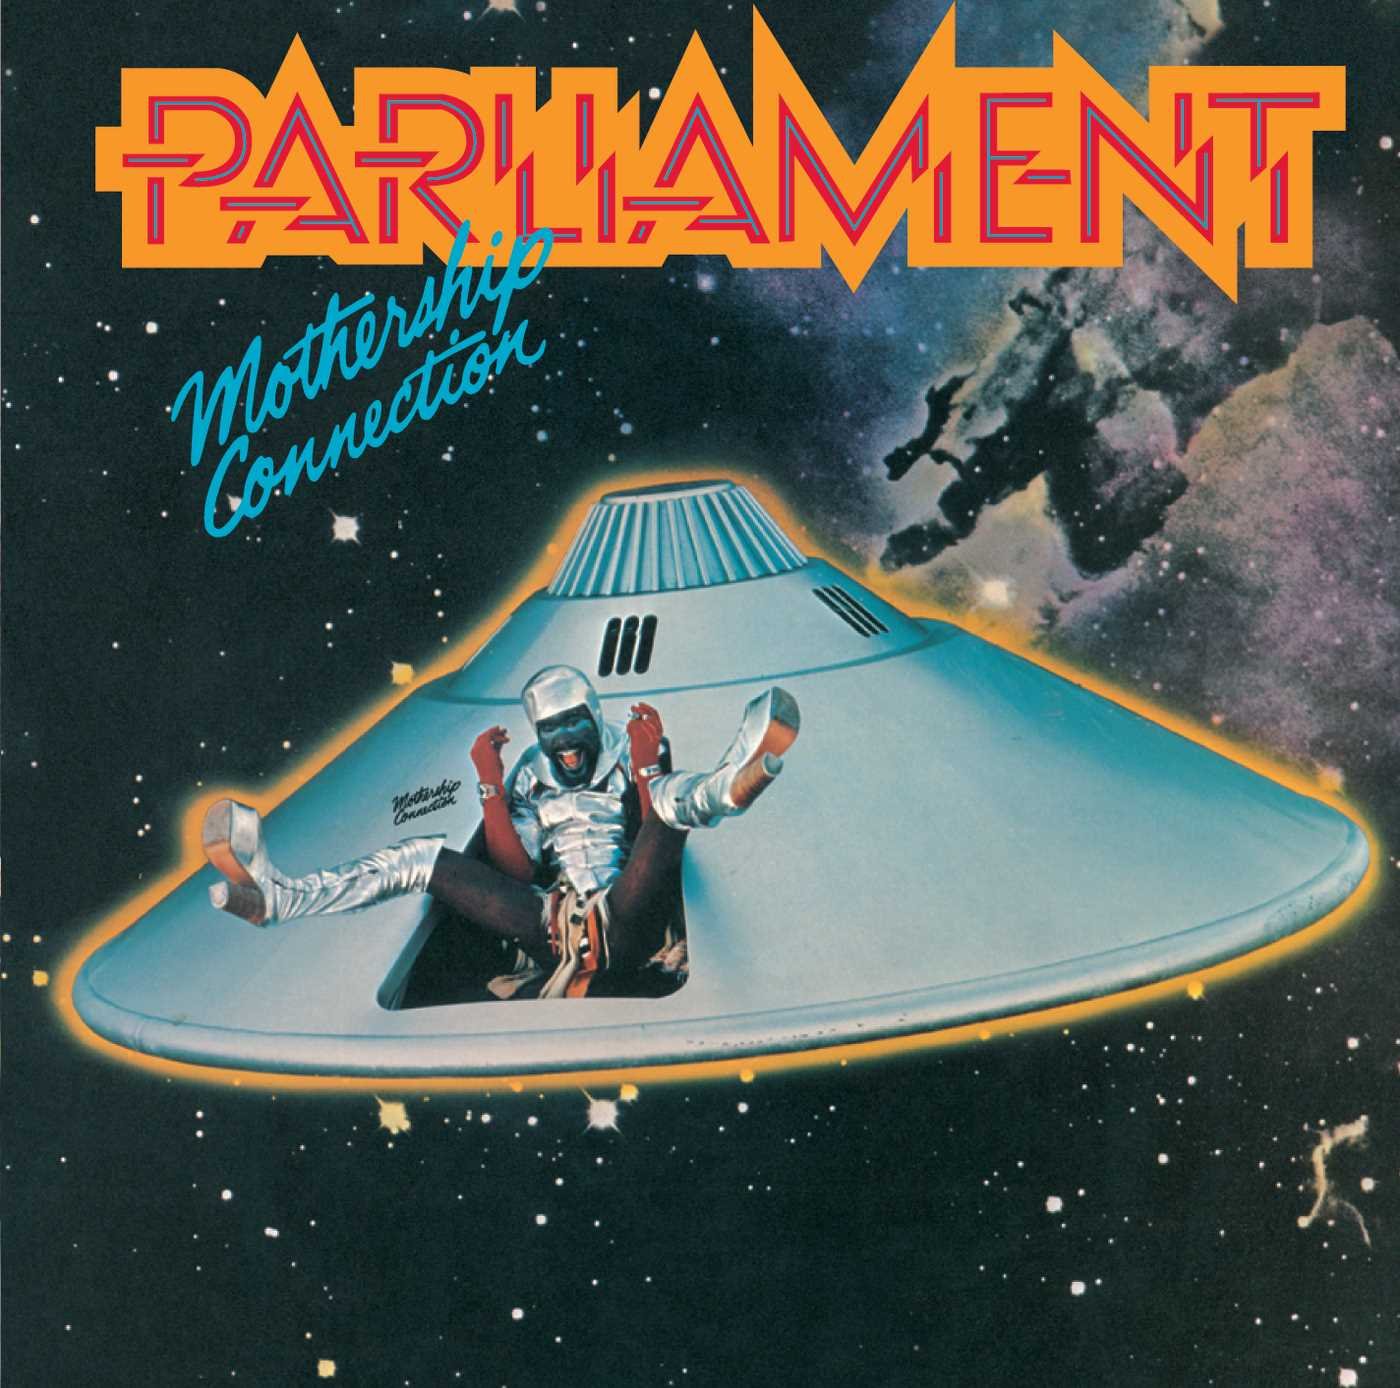 Parliament Mothership Connection cover artwork